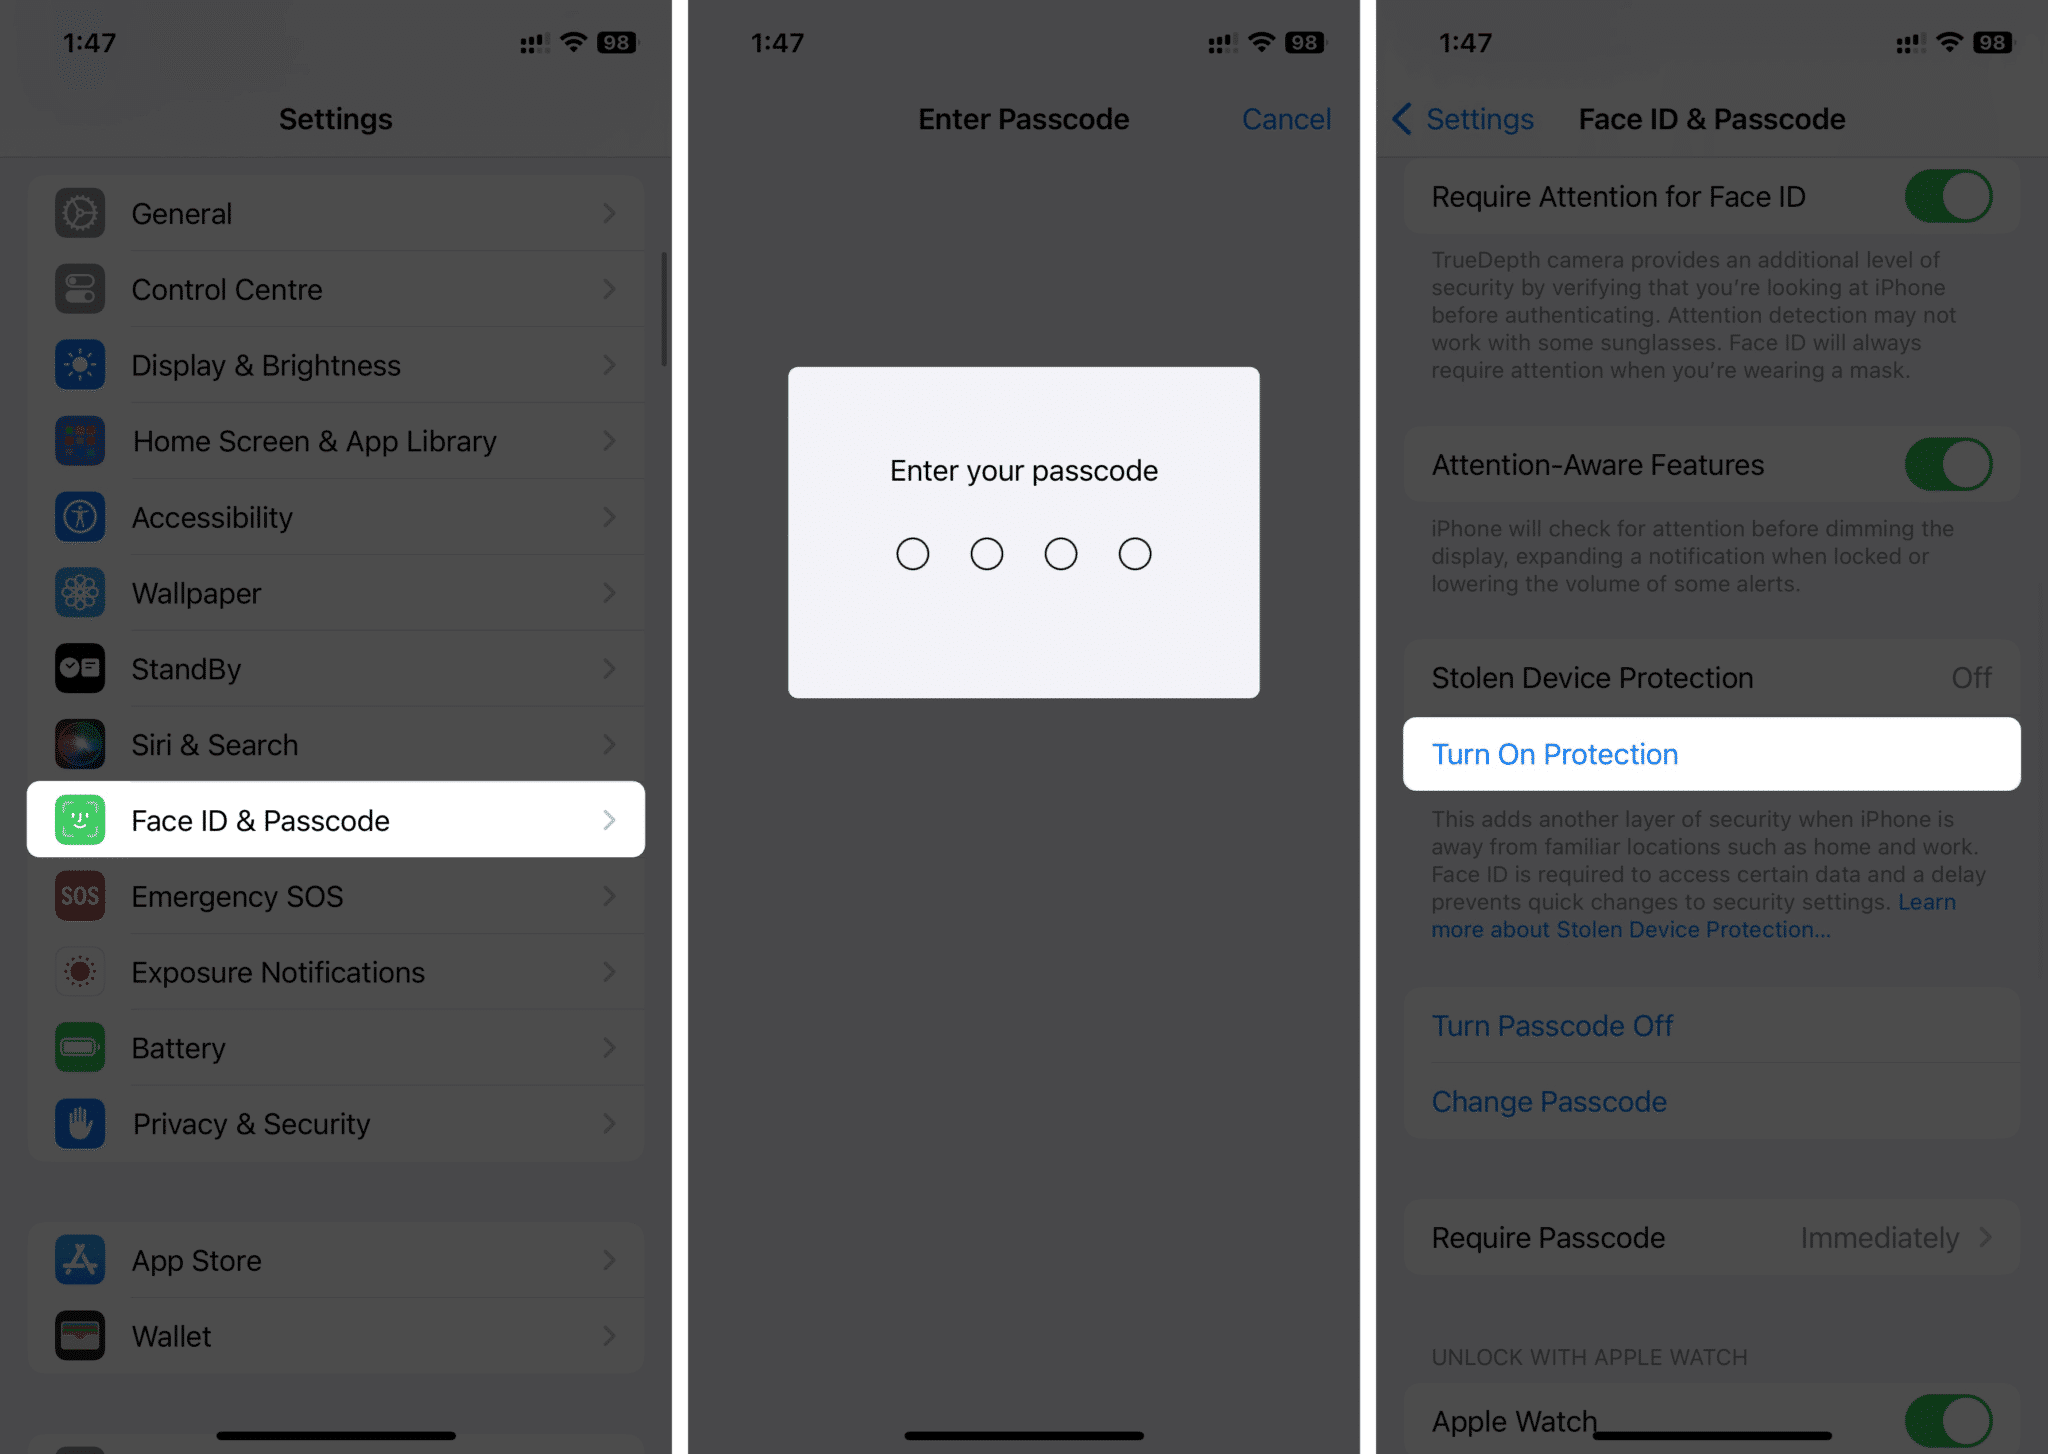 Enabling Stolen Device Protection in iOS 17.3